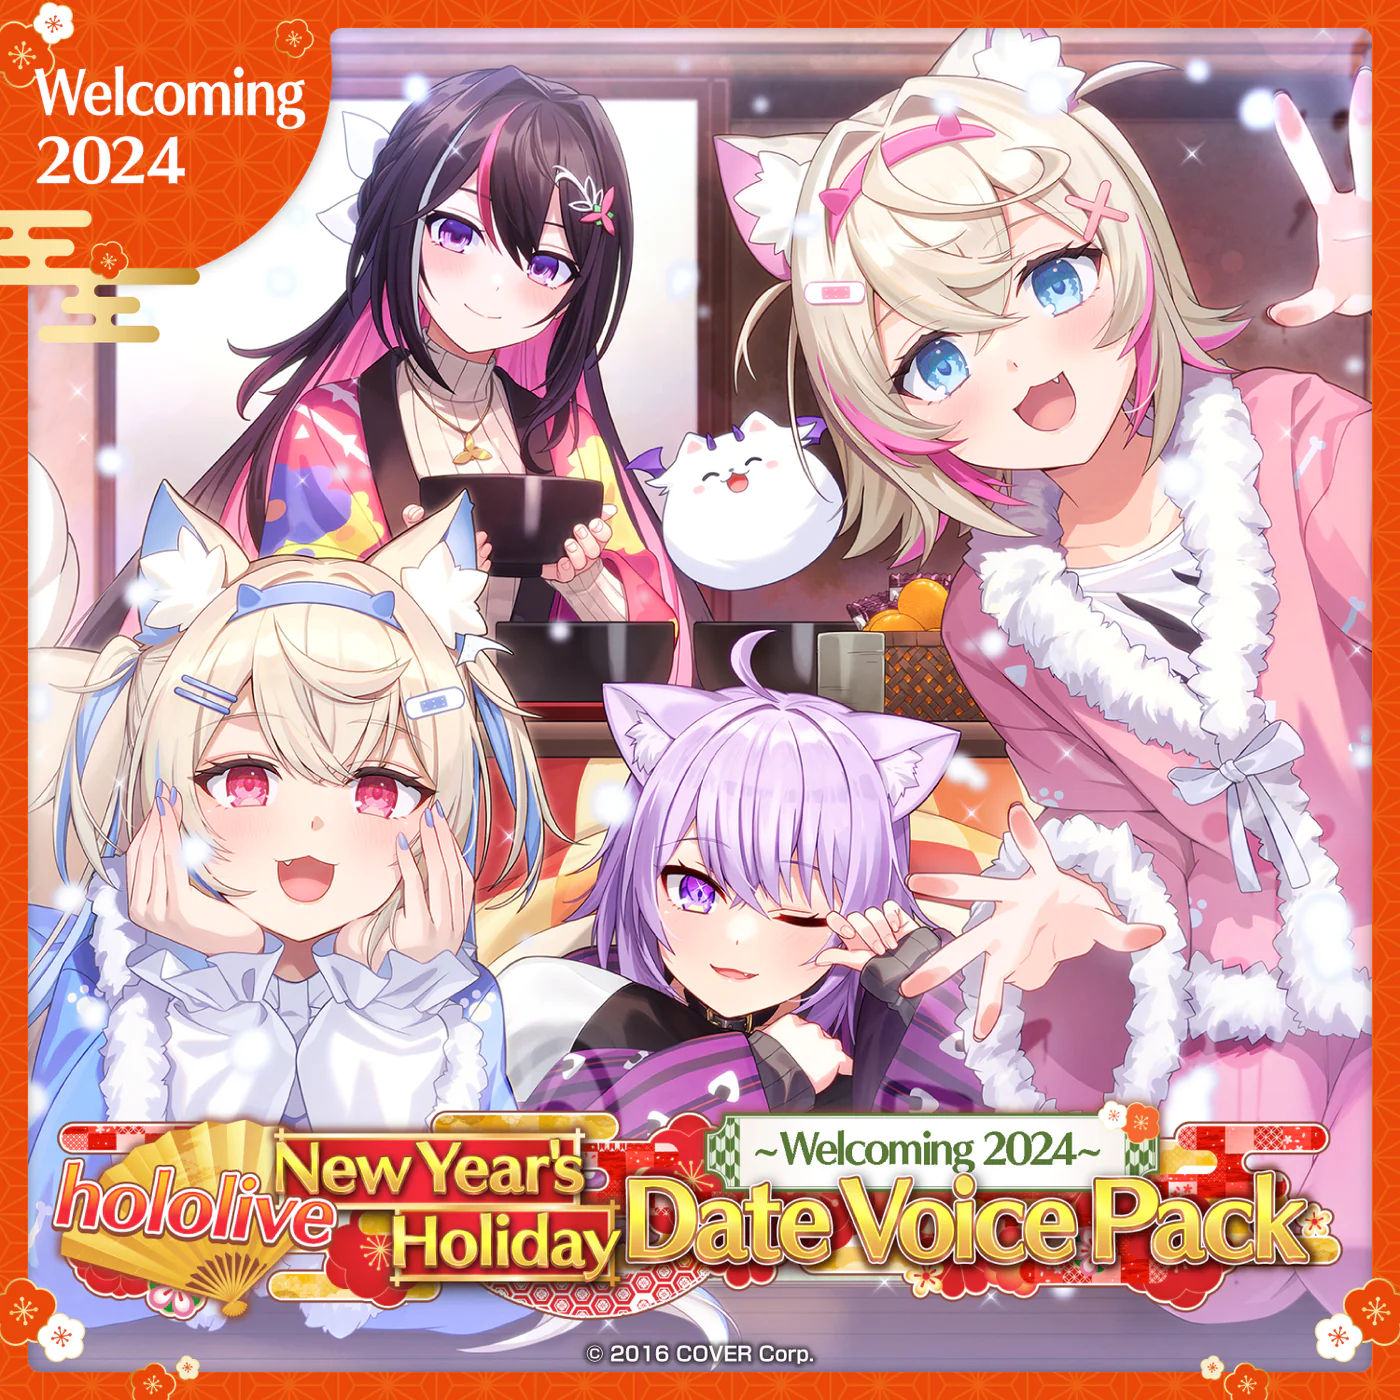 [In Stock] hololive New Year's Holiday Date Voice Pack ~Welcoming 2024~ Set